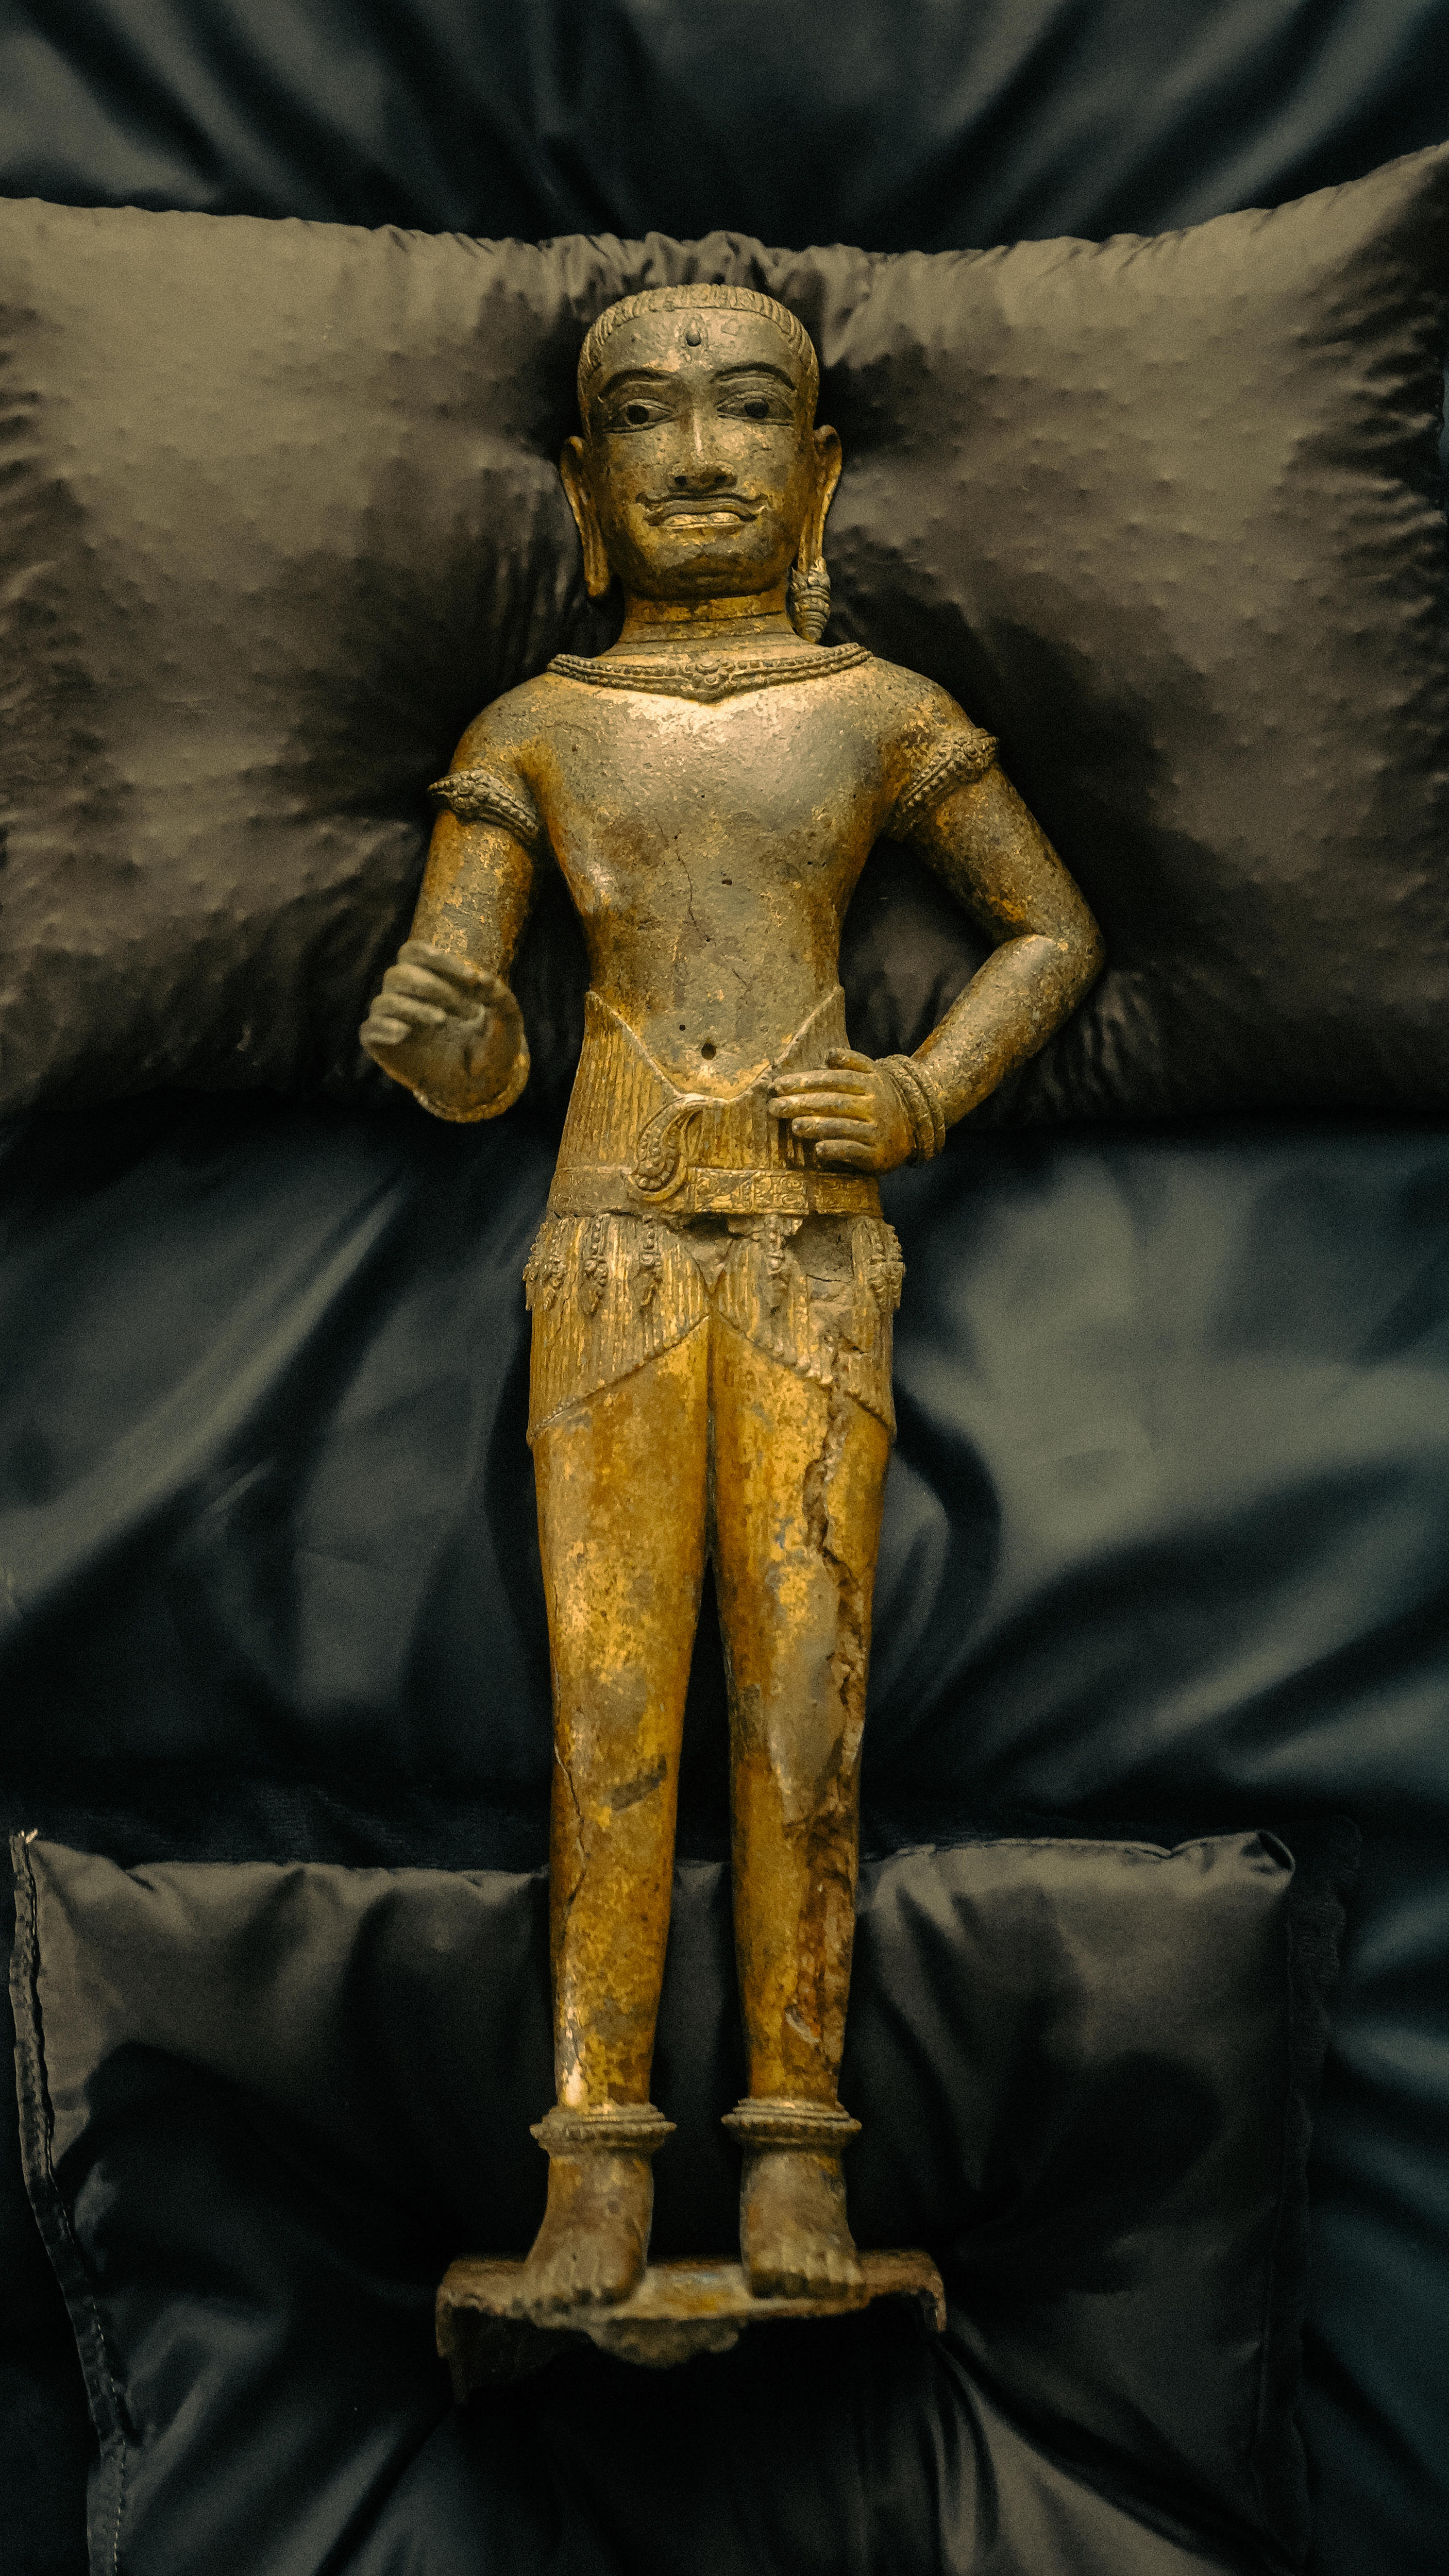 A statue on a pillow.